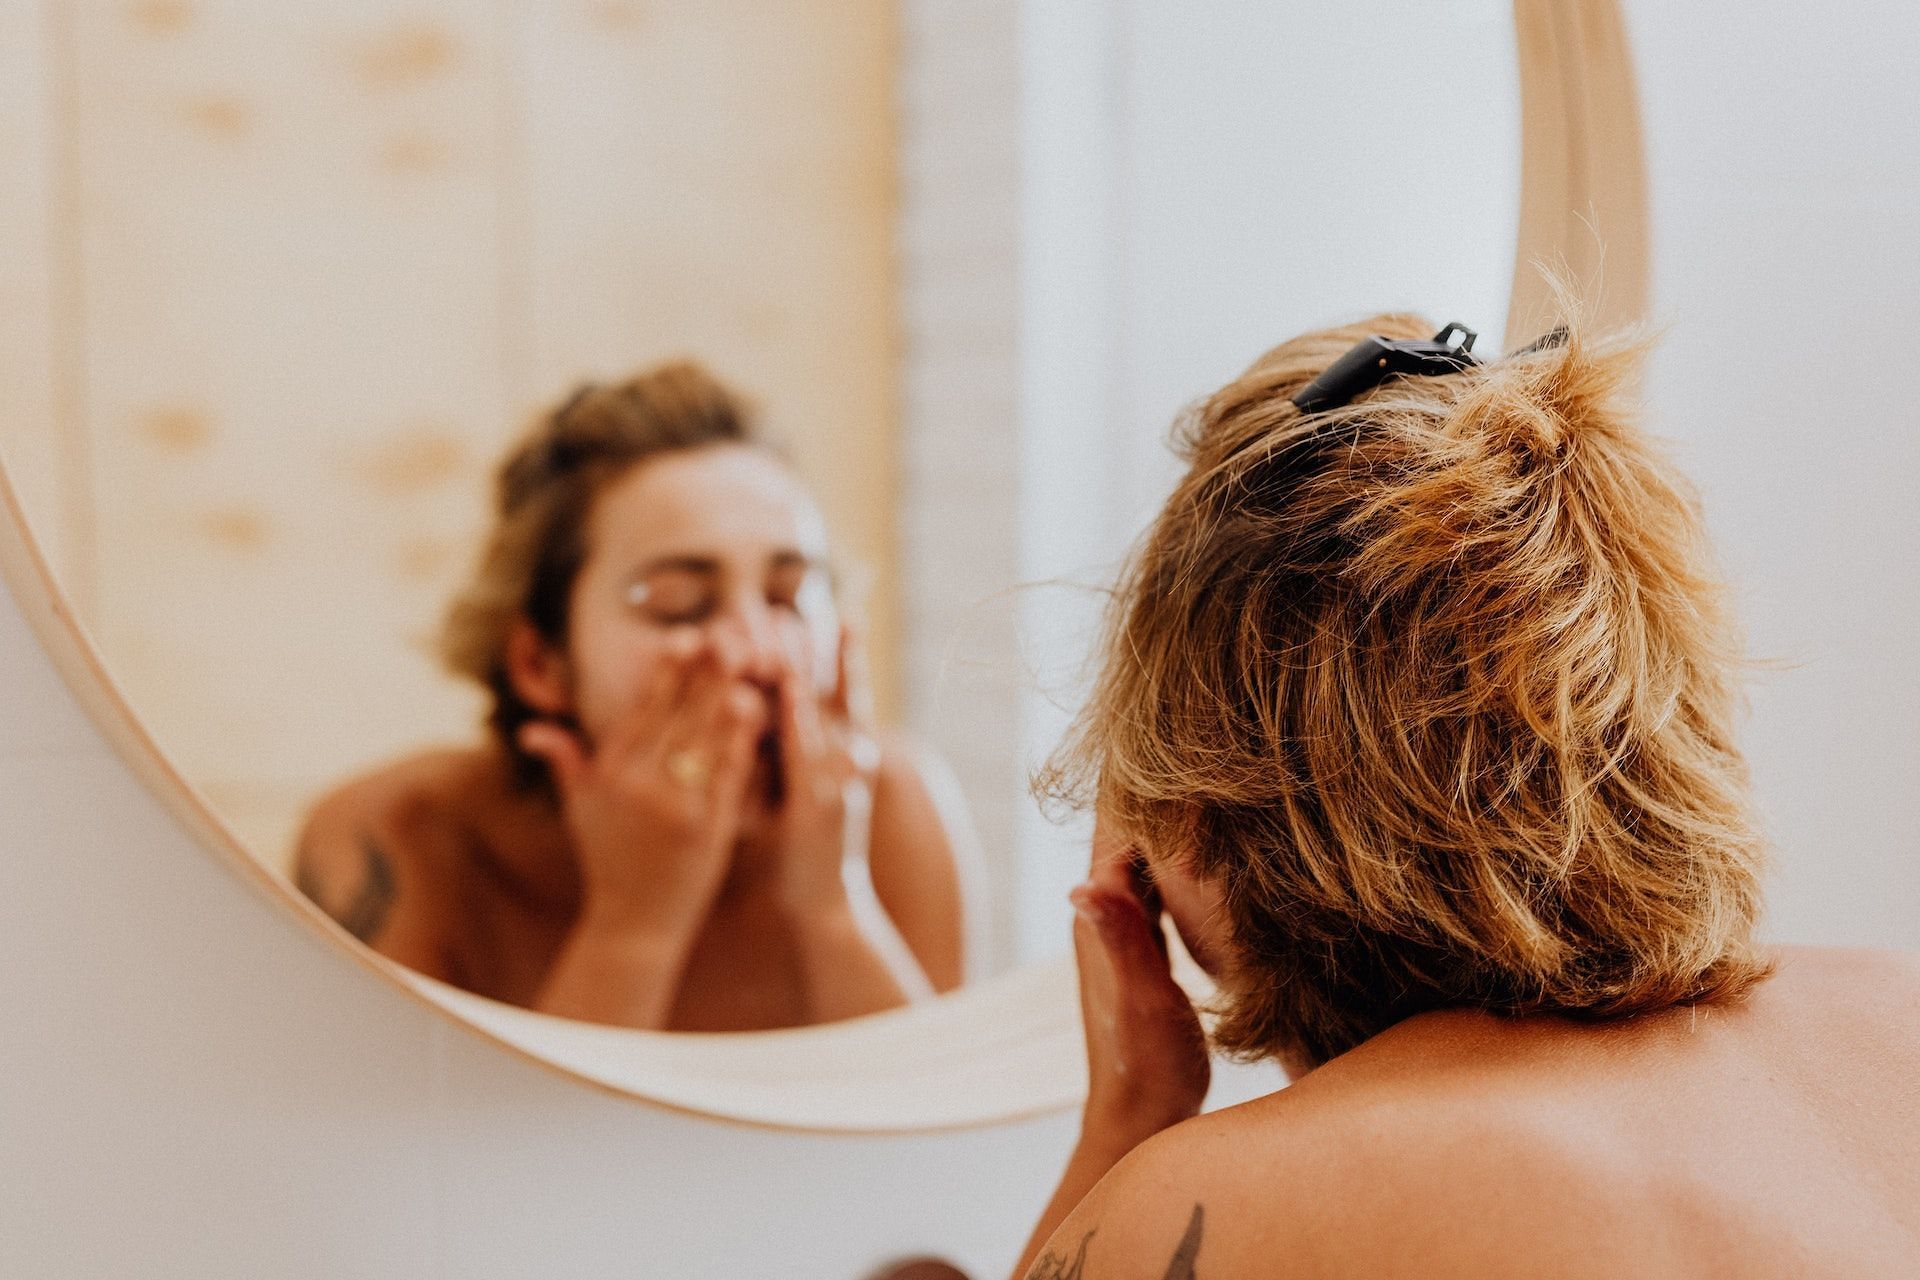 Look out for formaldehyde in your face cleanser. (Photo via Pexels/Karolina Grabowska)